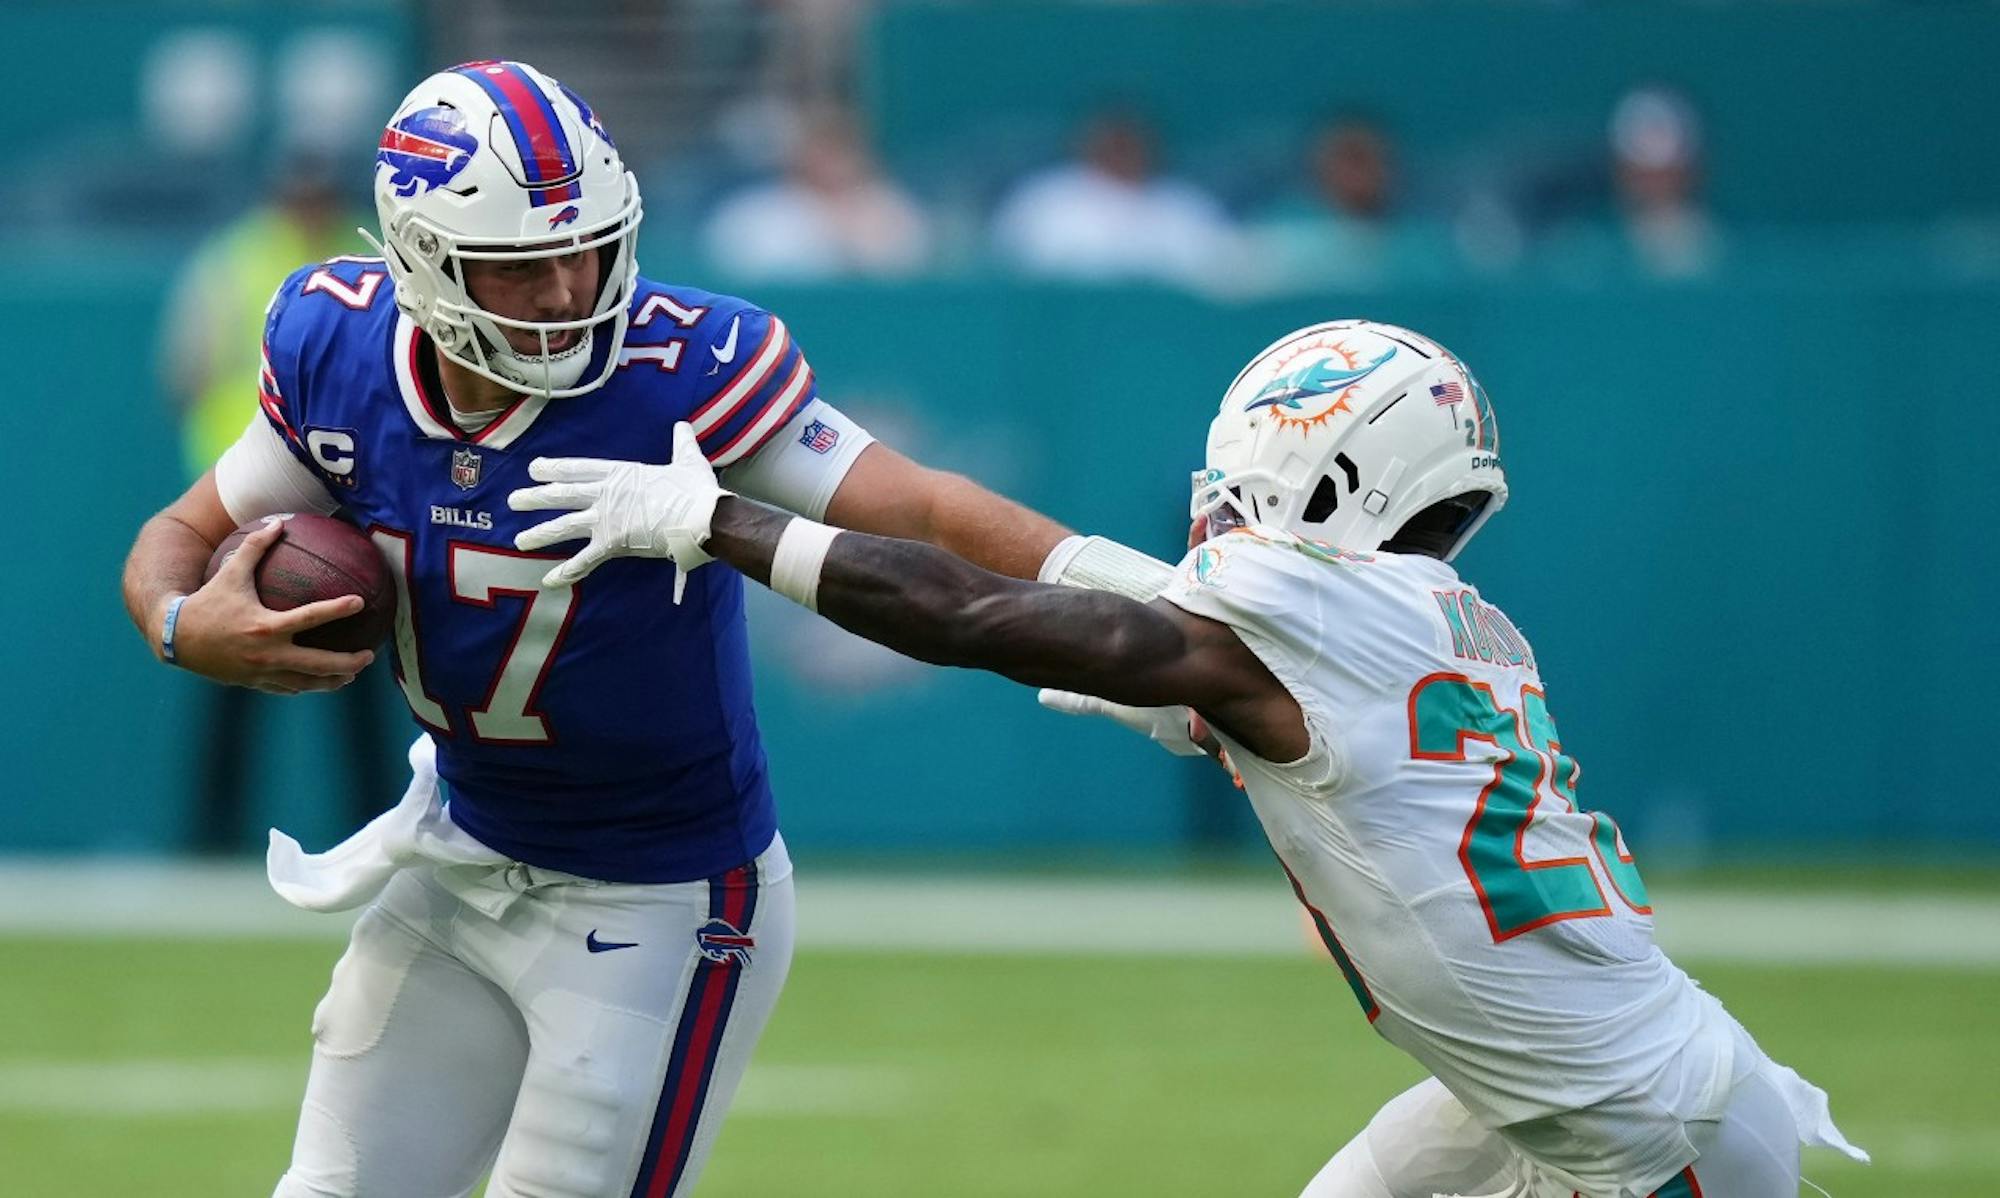 Premium: This First-Half Trend Has Us Eyeing a Specific Bet on the Bills